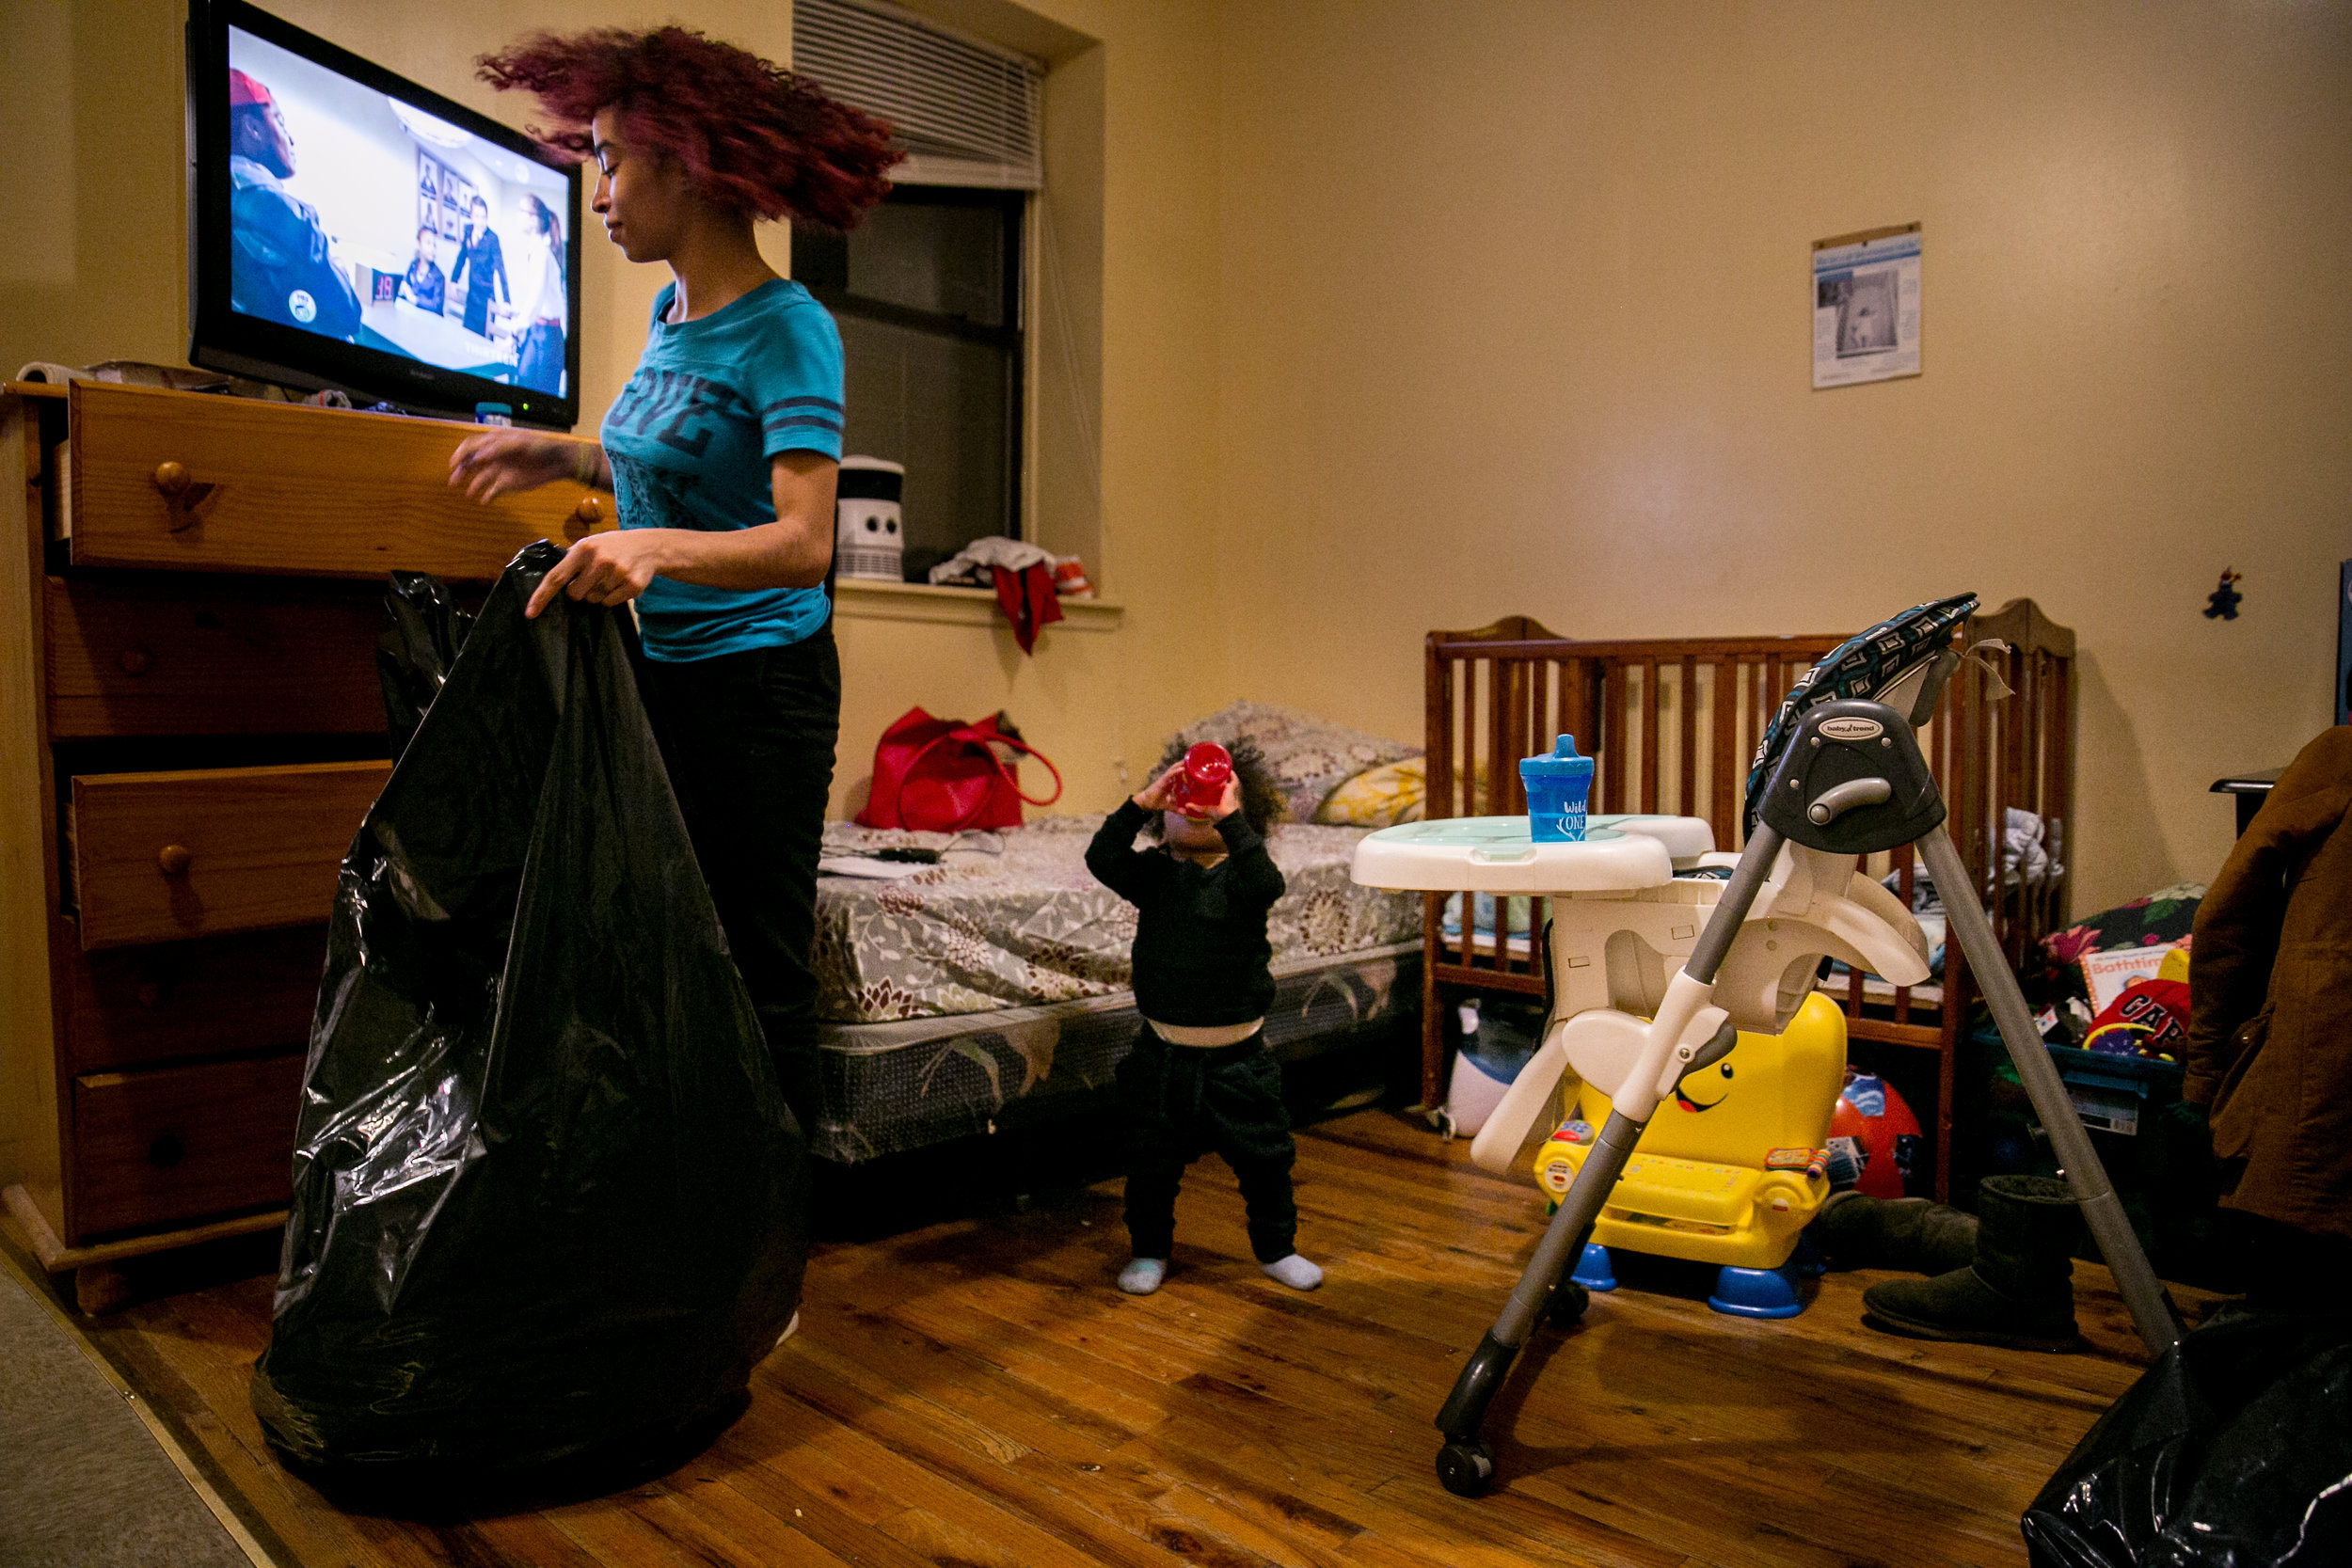  Madelyn Brito packs up her belongings alongside her 1-year-old son Cameron the night before moving out of the Kingston Family Residence homeless shelter in Brooklyn, New York 